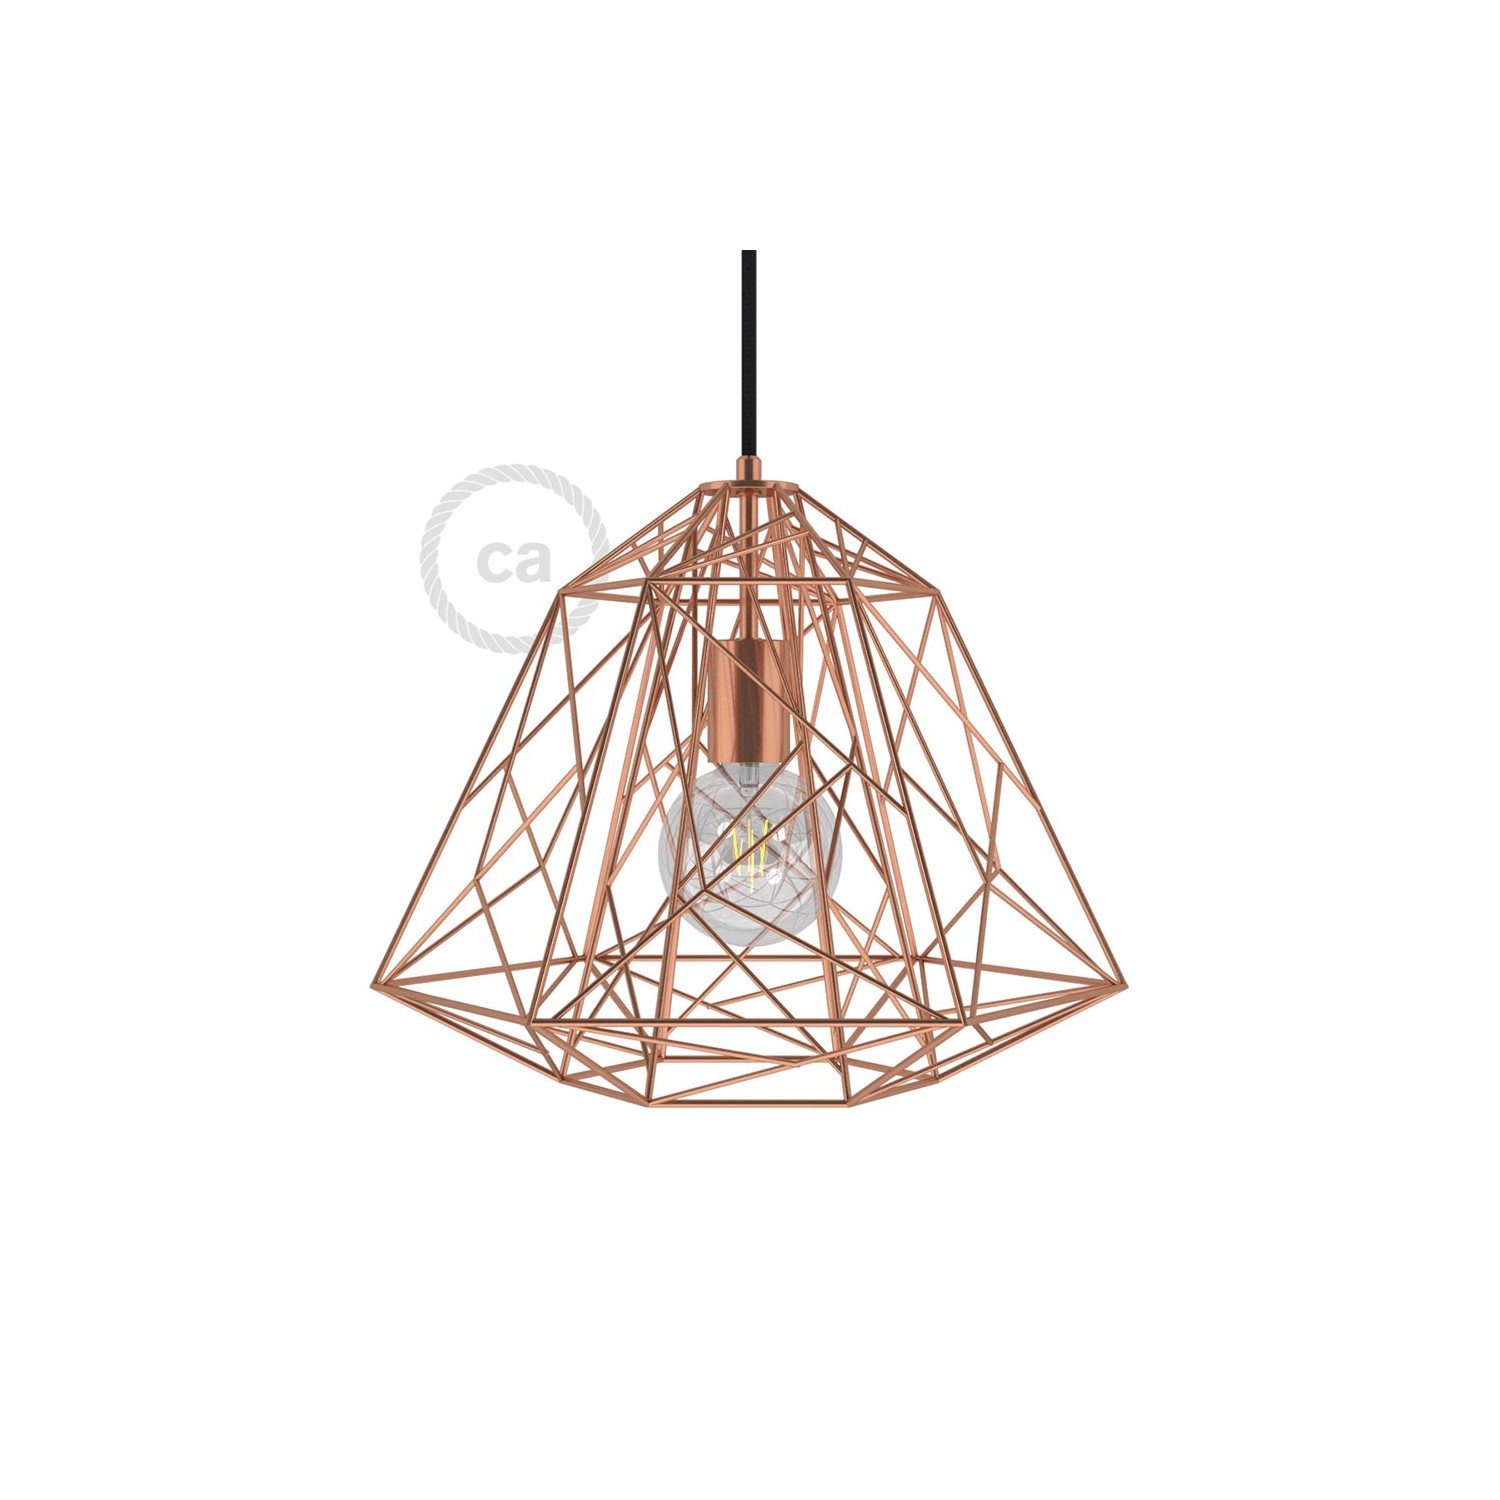 Apollo XL naked cage metal Lampshade with E27 lamp holder